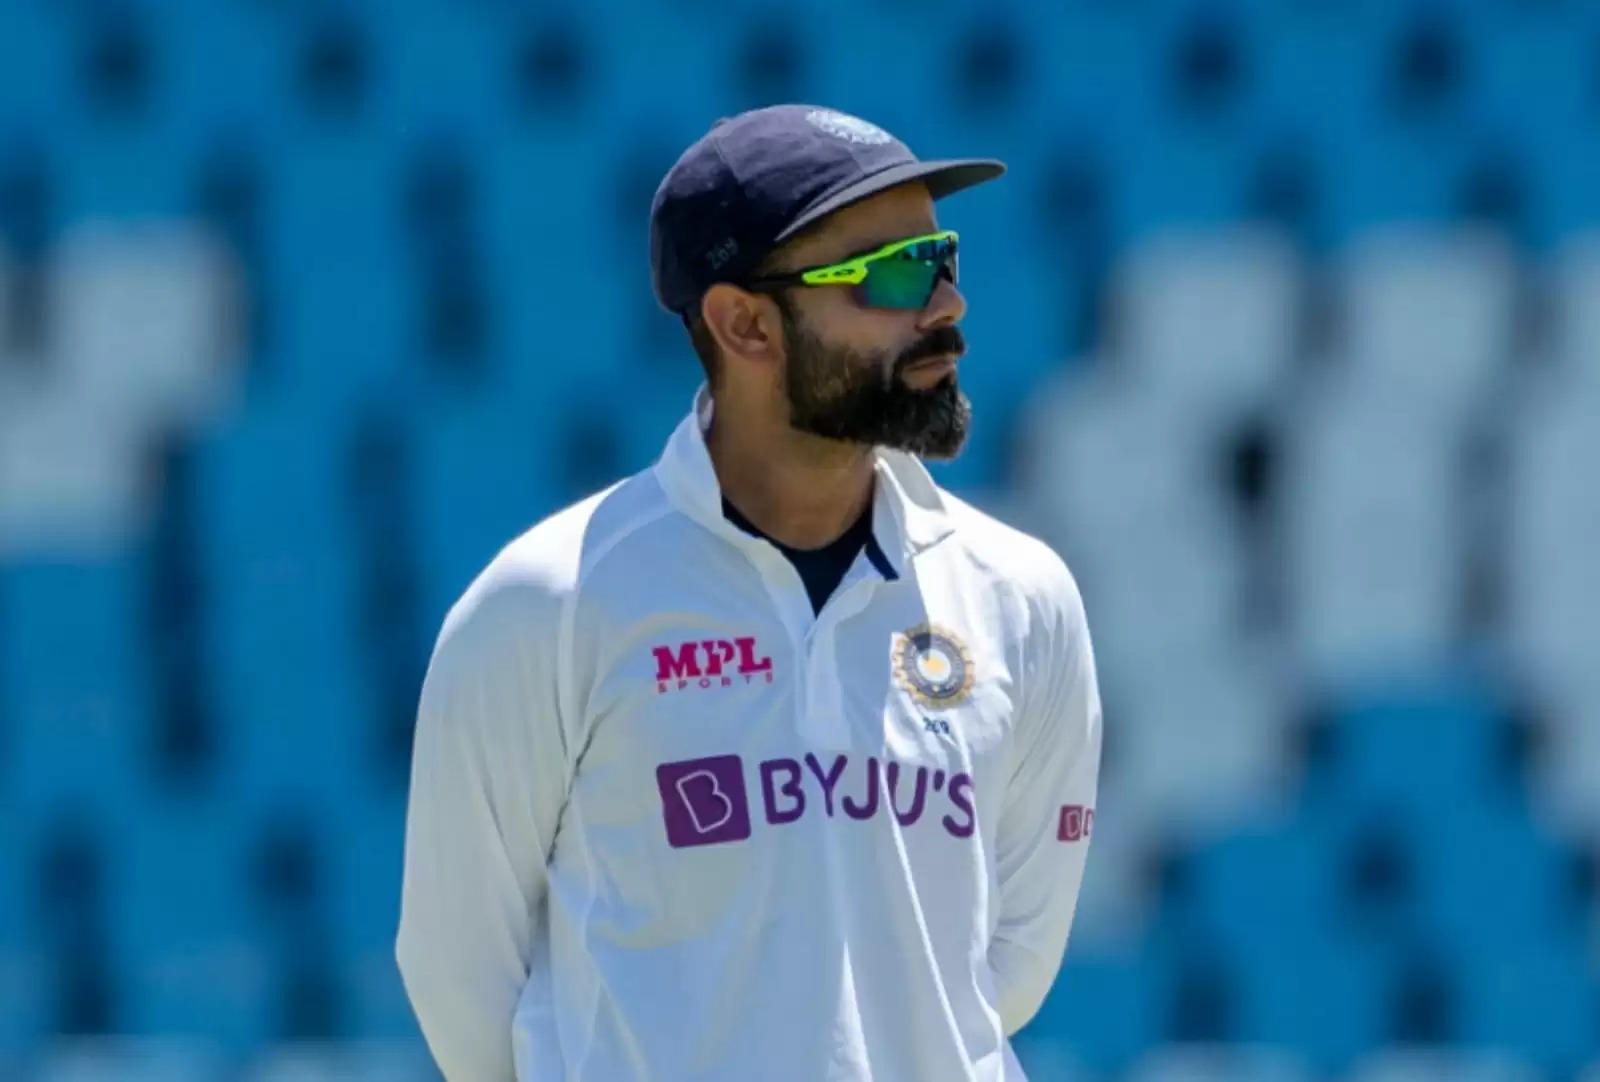 Virat Kohli asked the Indian Players for a ‘small favour’ before stepping down as captain